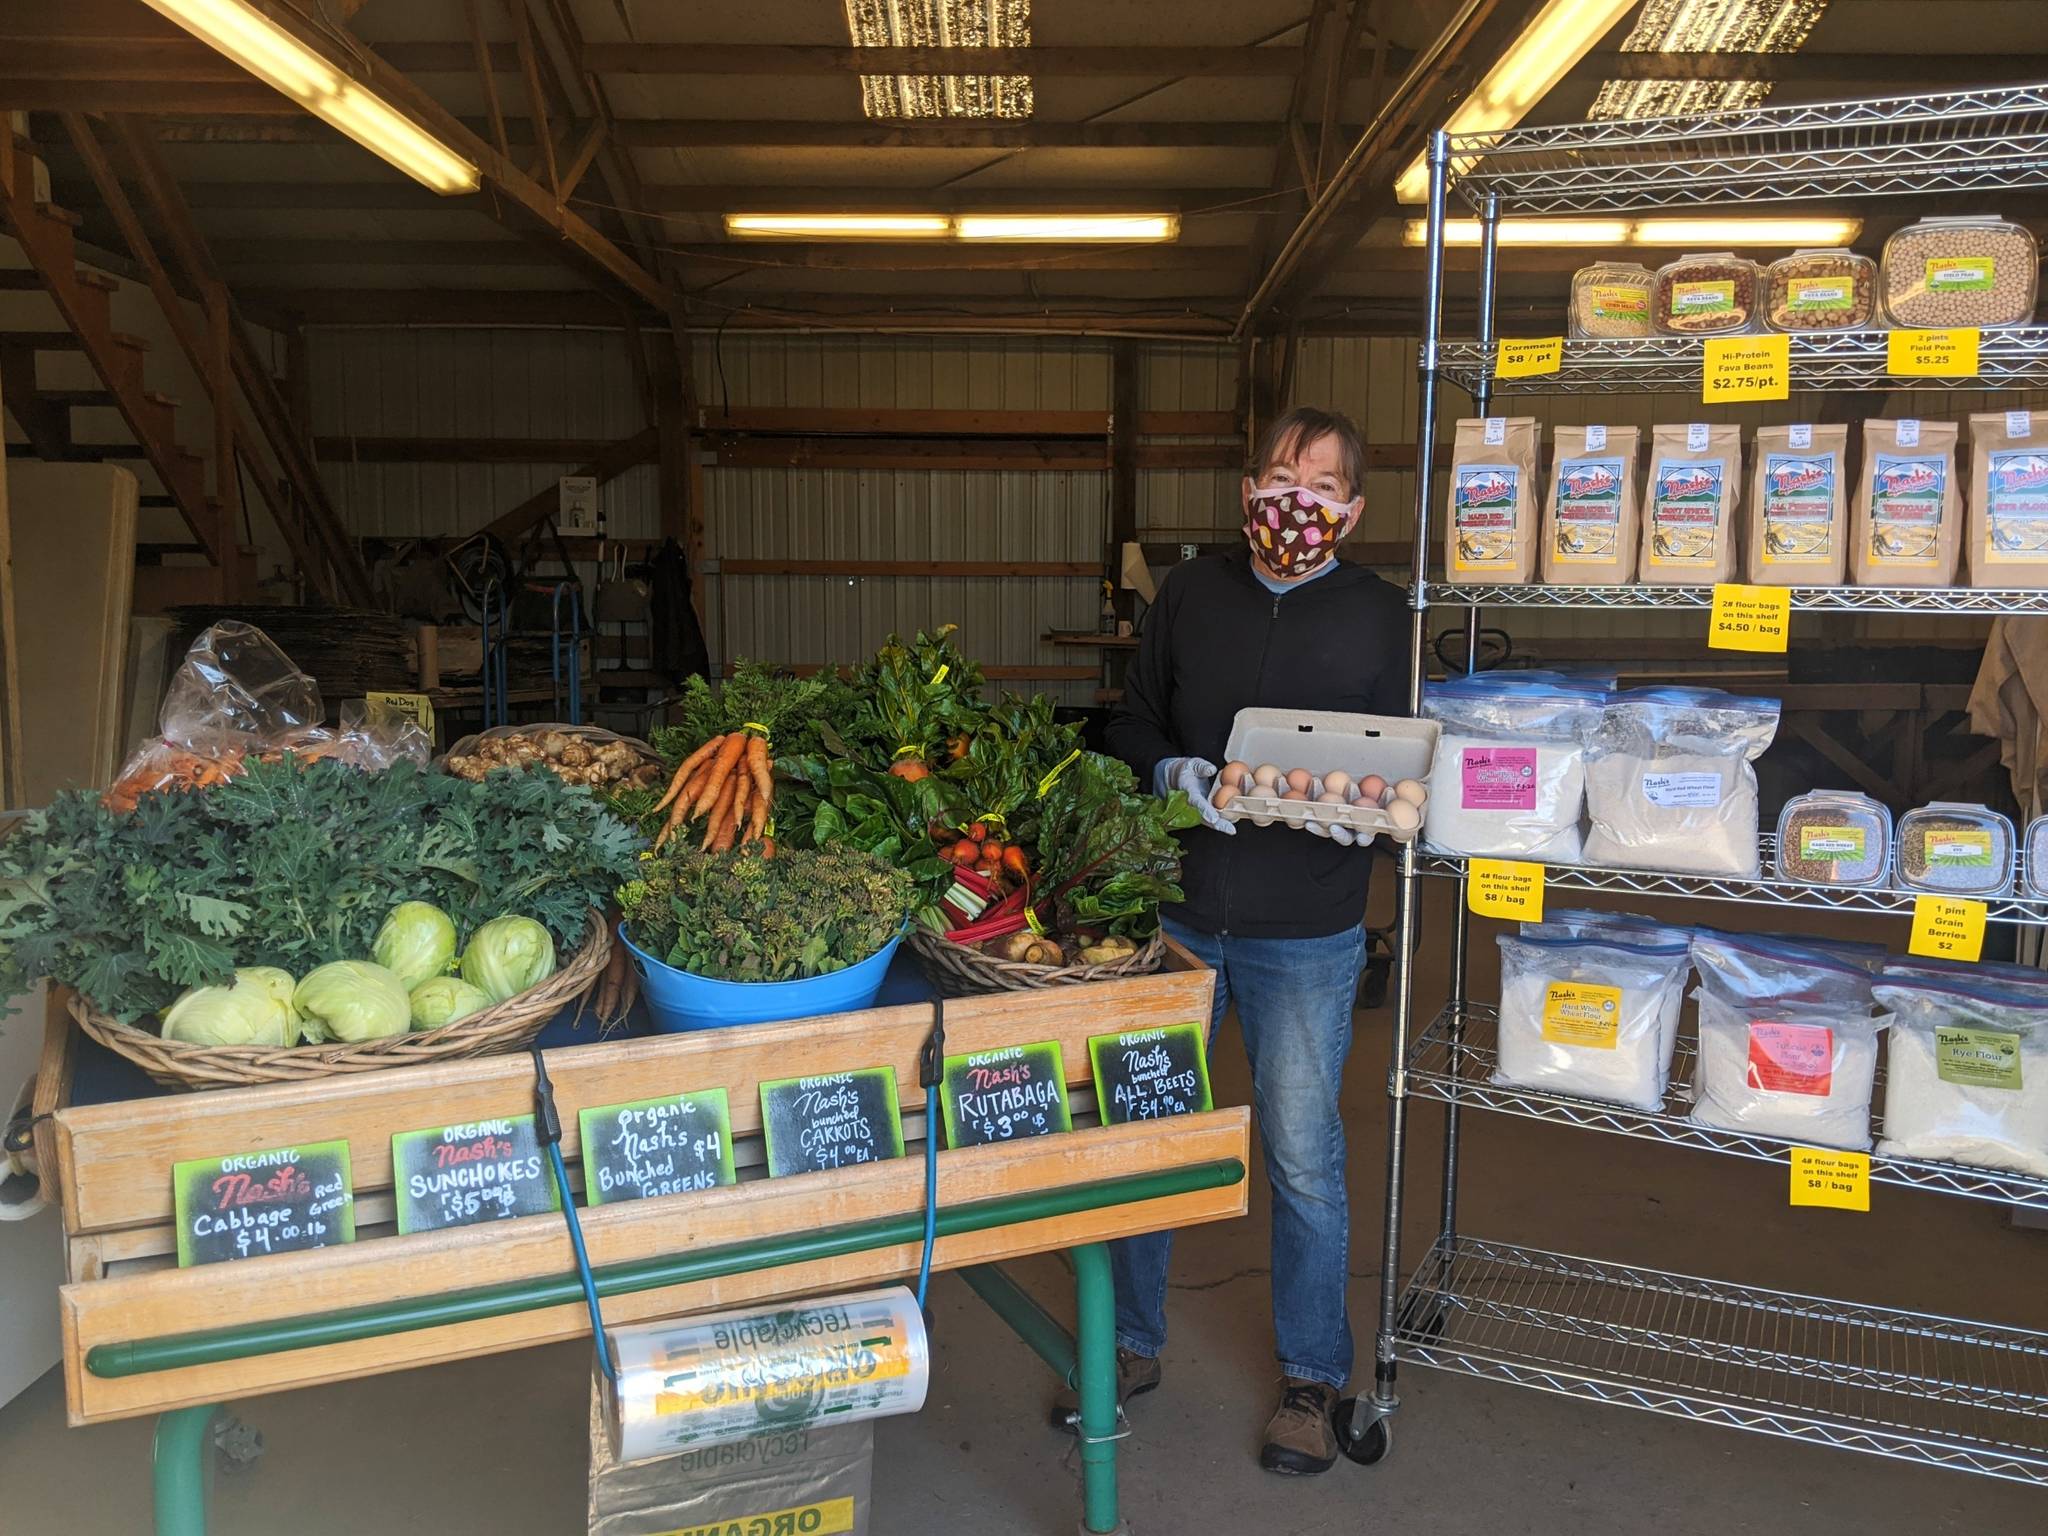 Nash’s Farm Stand owner Patty McManus shows a low-contact way to buy local vegetables, camelina oil, flour, grain and eggs. Photo by Emma Jane Garcia